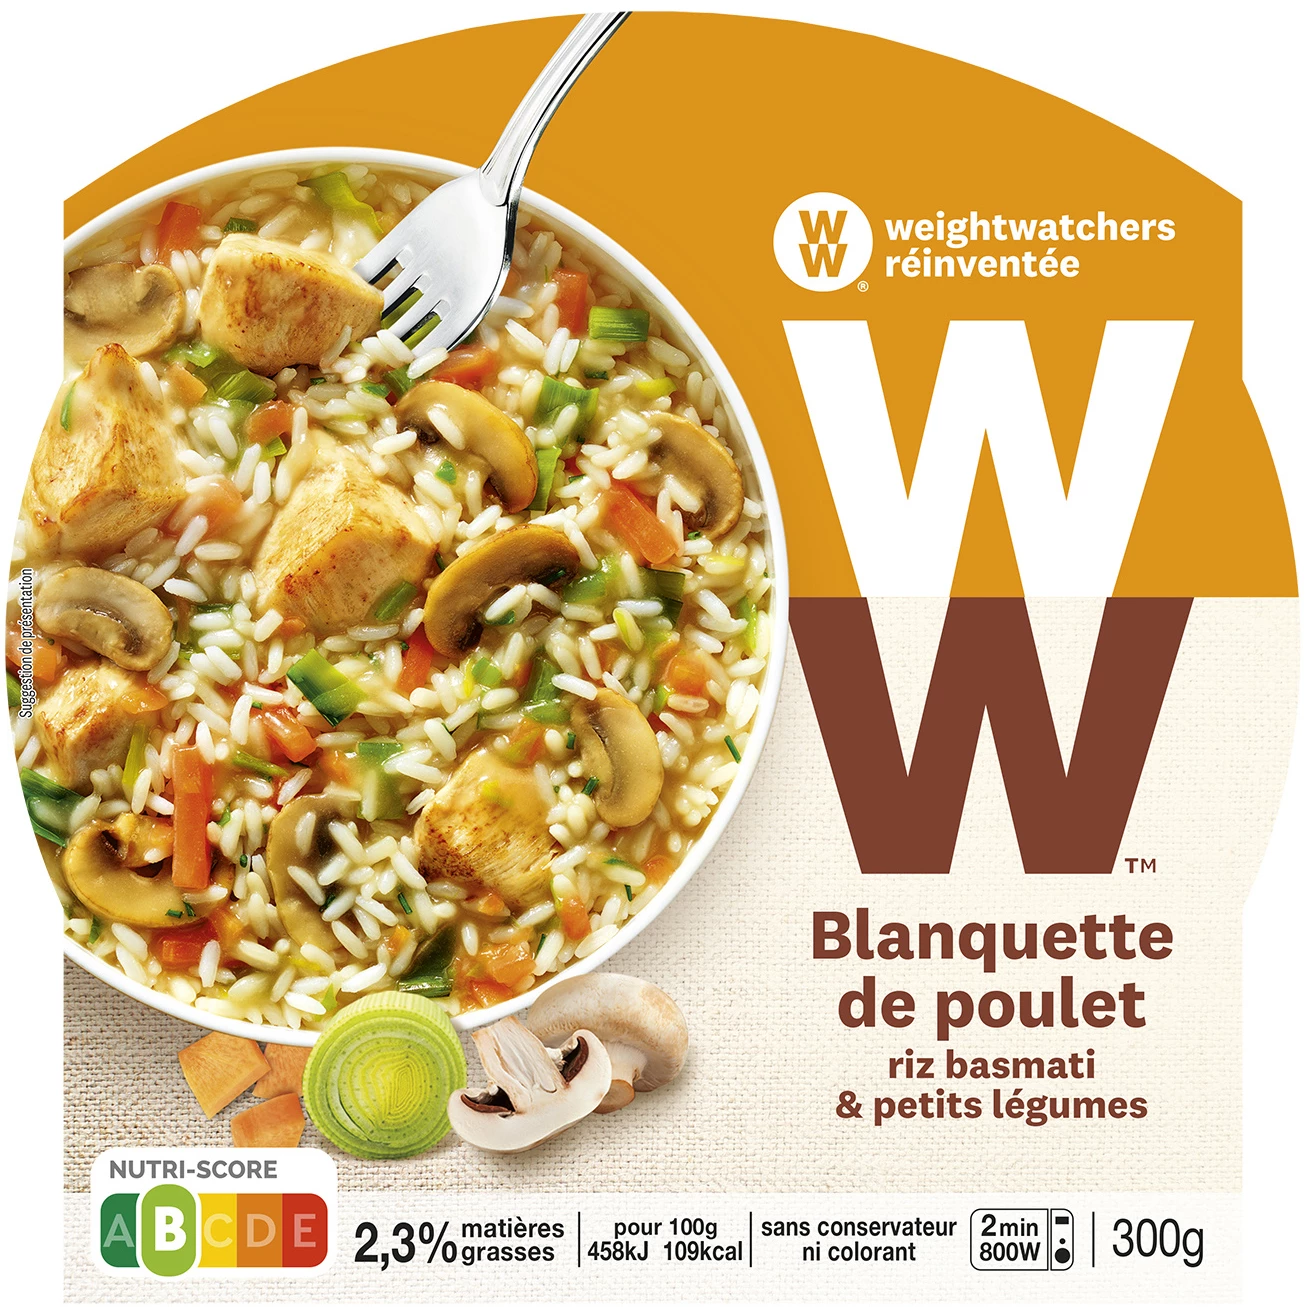 Chicken/rice/vegetable blanquette ready meal - WEIGHT WATCHERS